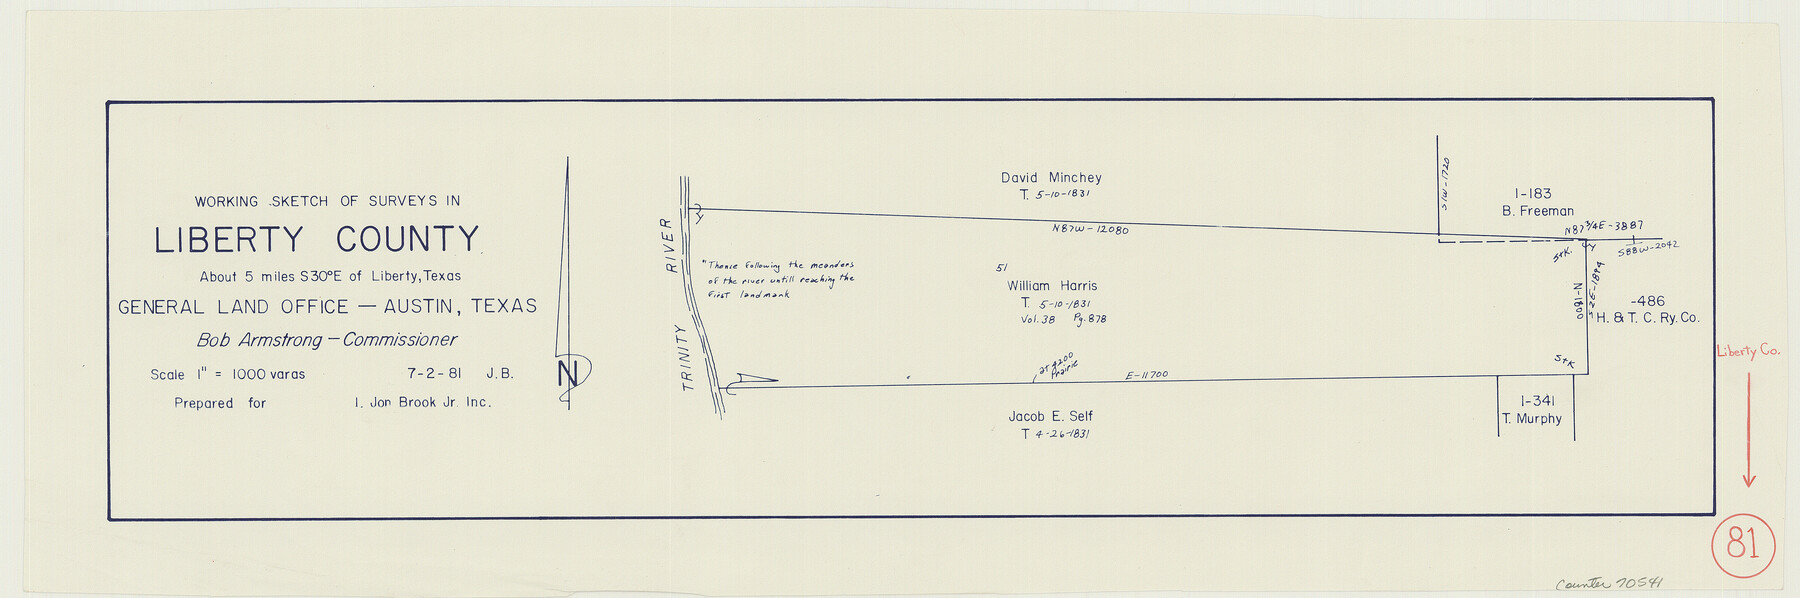 70541, Liberty County Working Sketch 81, General Map Collection